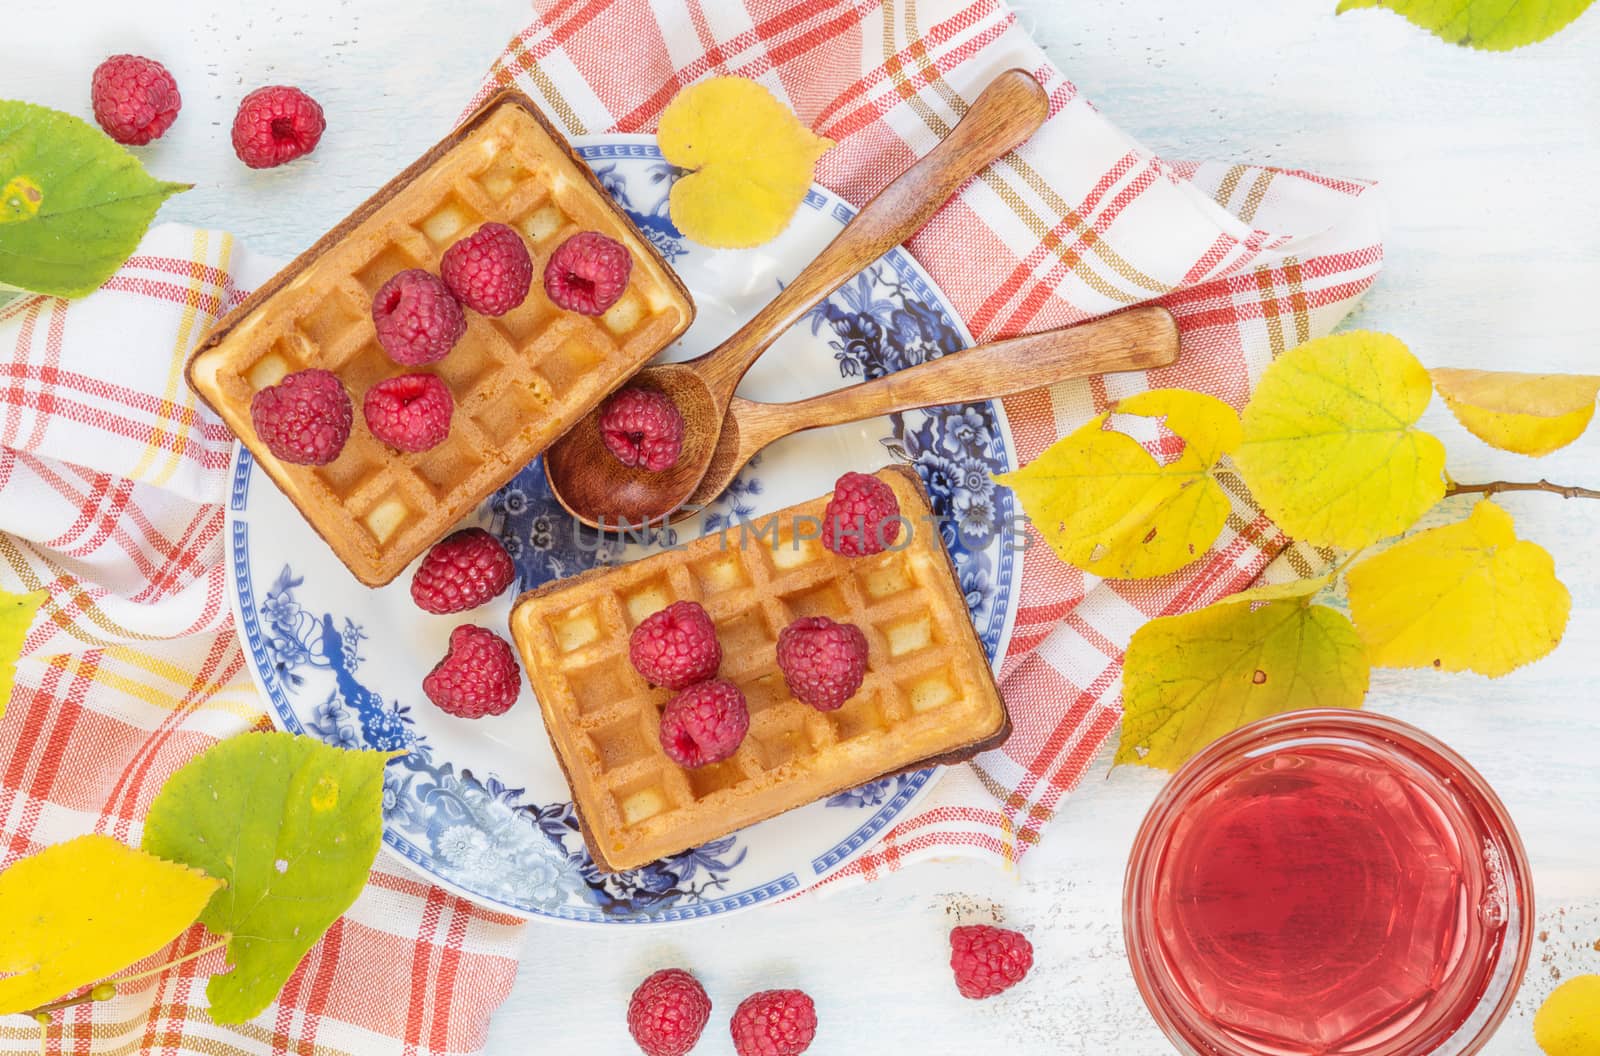 Autumn breakfast with waffles, fresh raspberries and glass of tea, standing on a crumpled checkered napkin